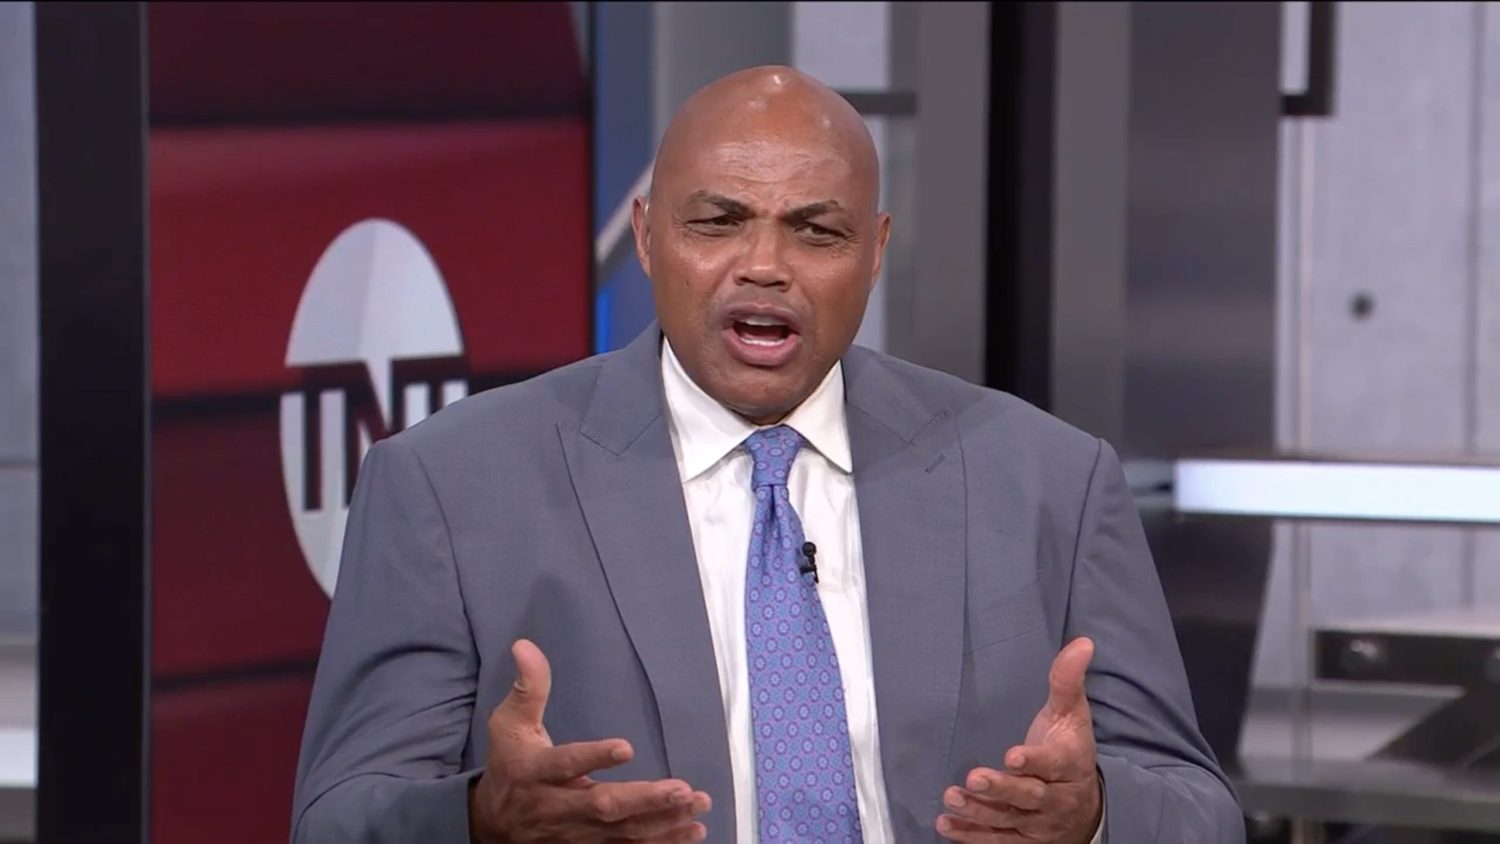 Charles Barkley ranting about Congress on Inside the NBA